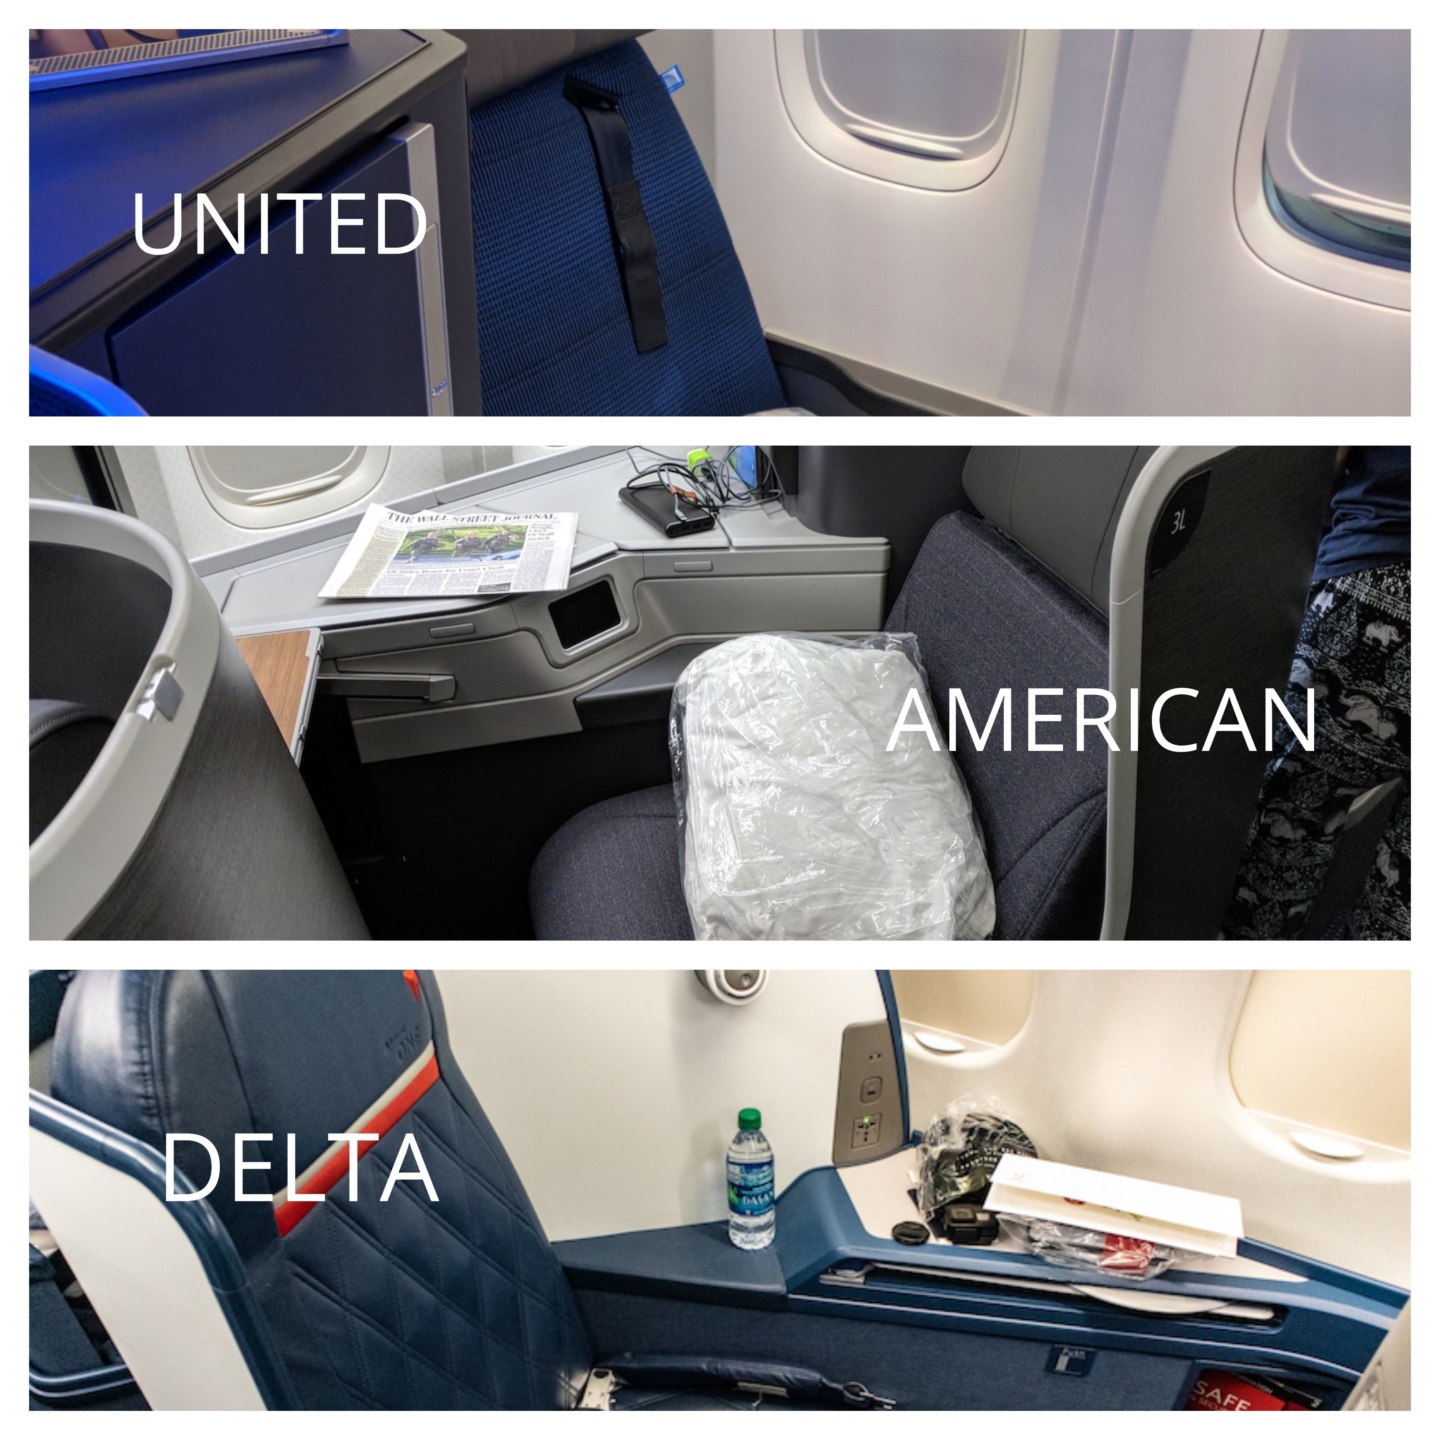 American vs United vs Delta: Evaluating the Best Business Class Product